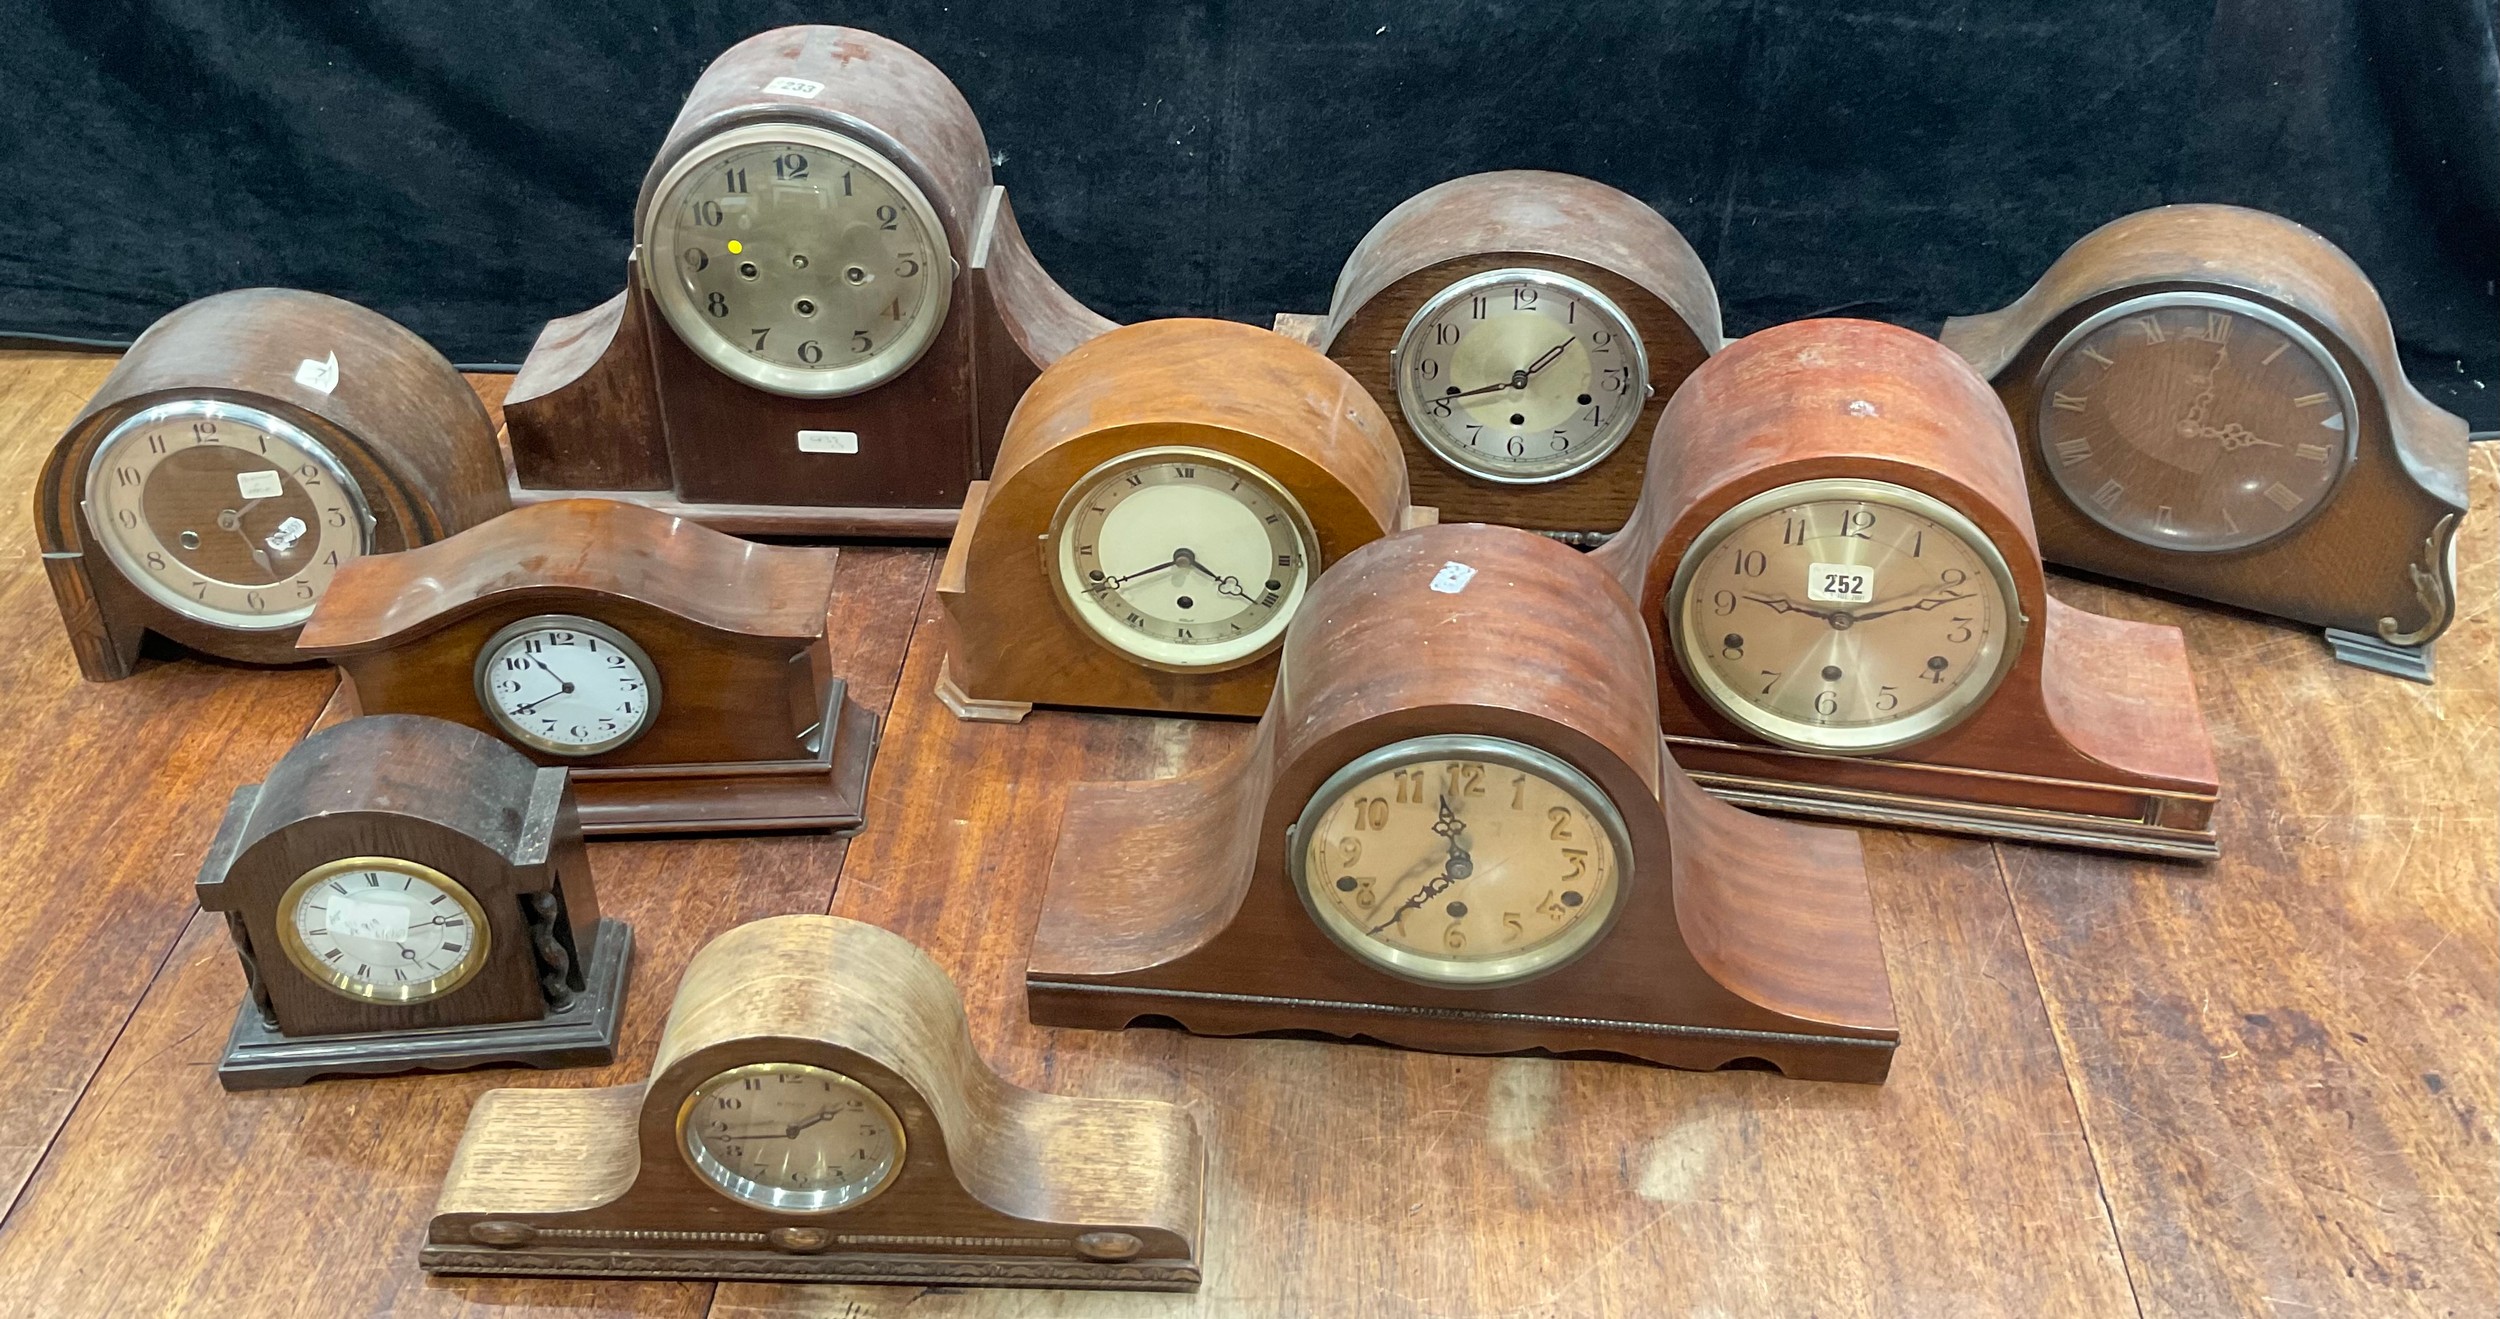 Clocks - early to mid 20th century tambour mantel clocks, various makers, timbers and forms (10)